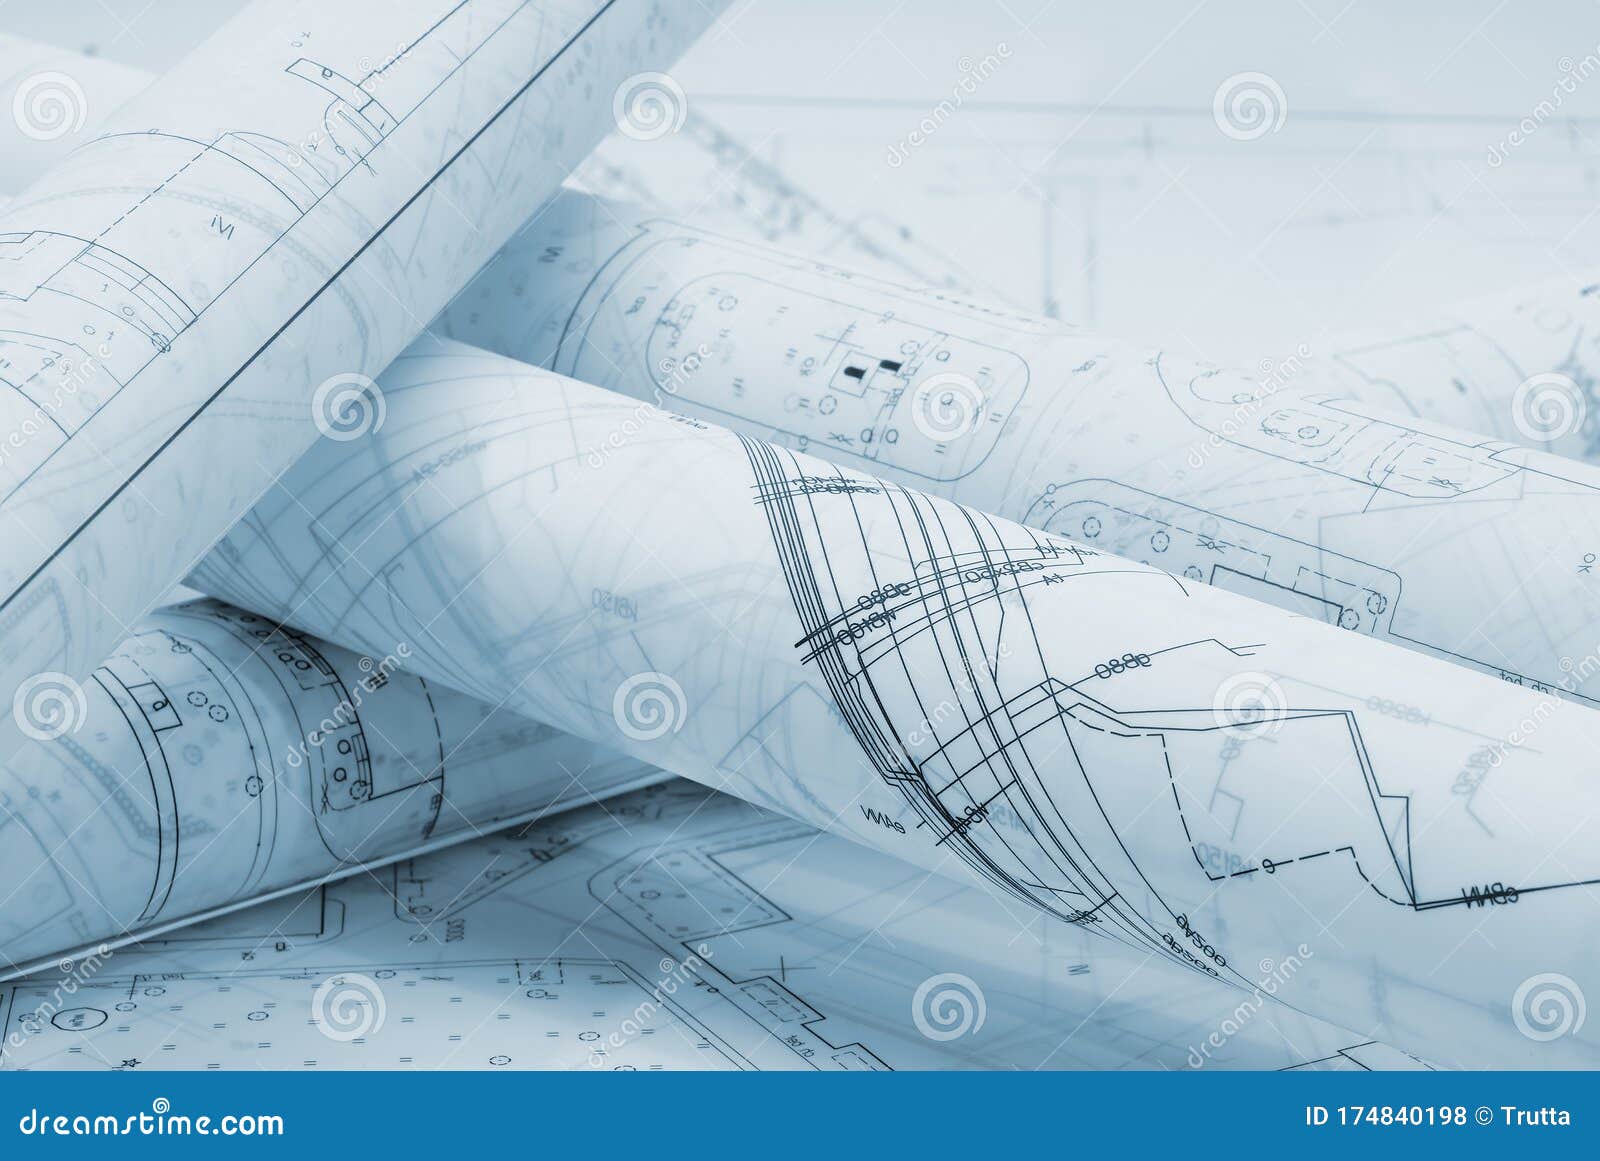 rolled architectural plans lying on drawing board